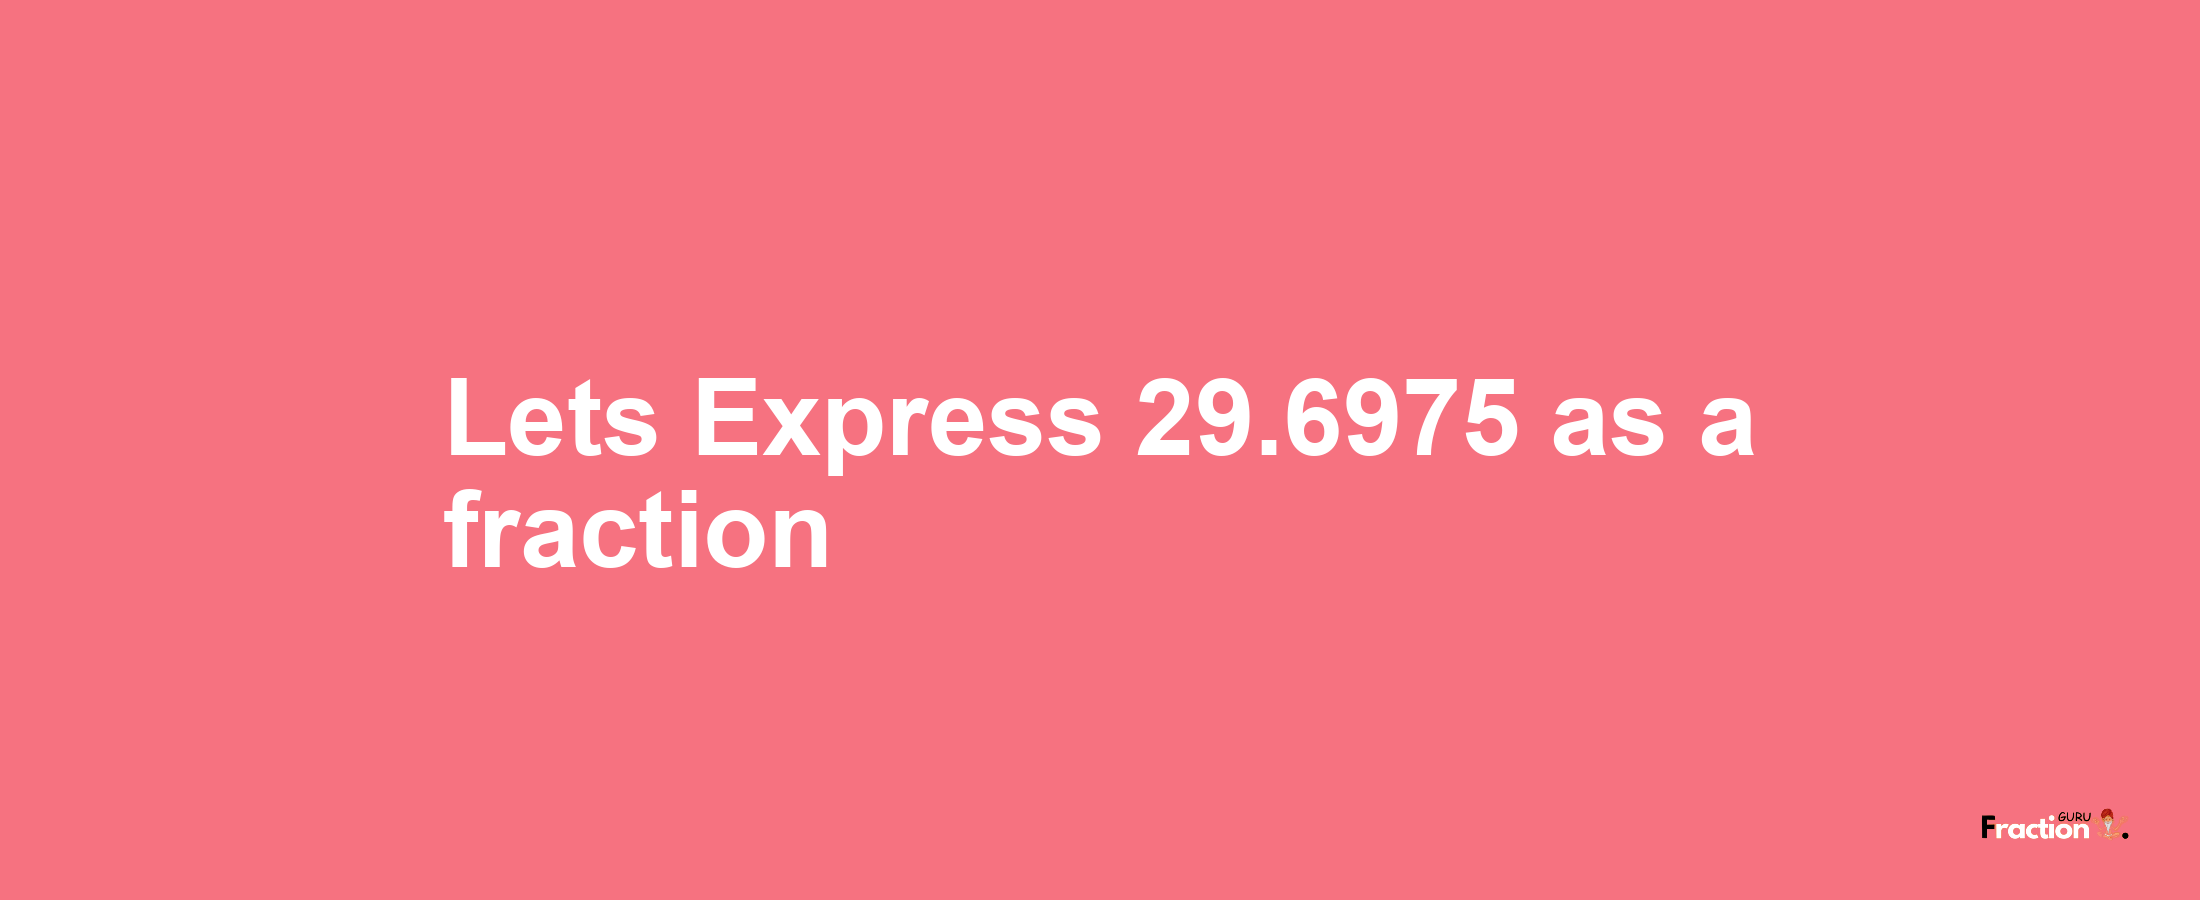 Lets Express 29.6975 as afraction